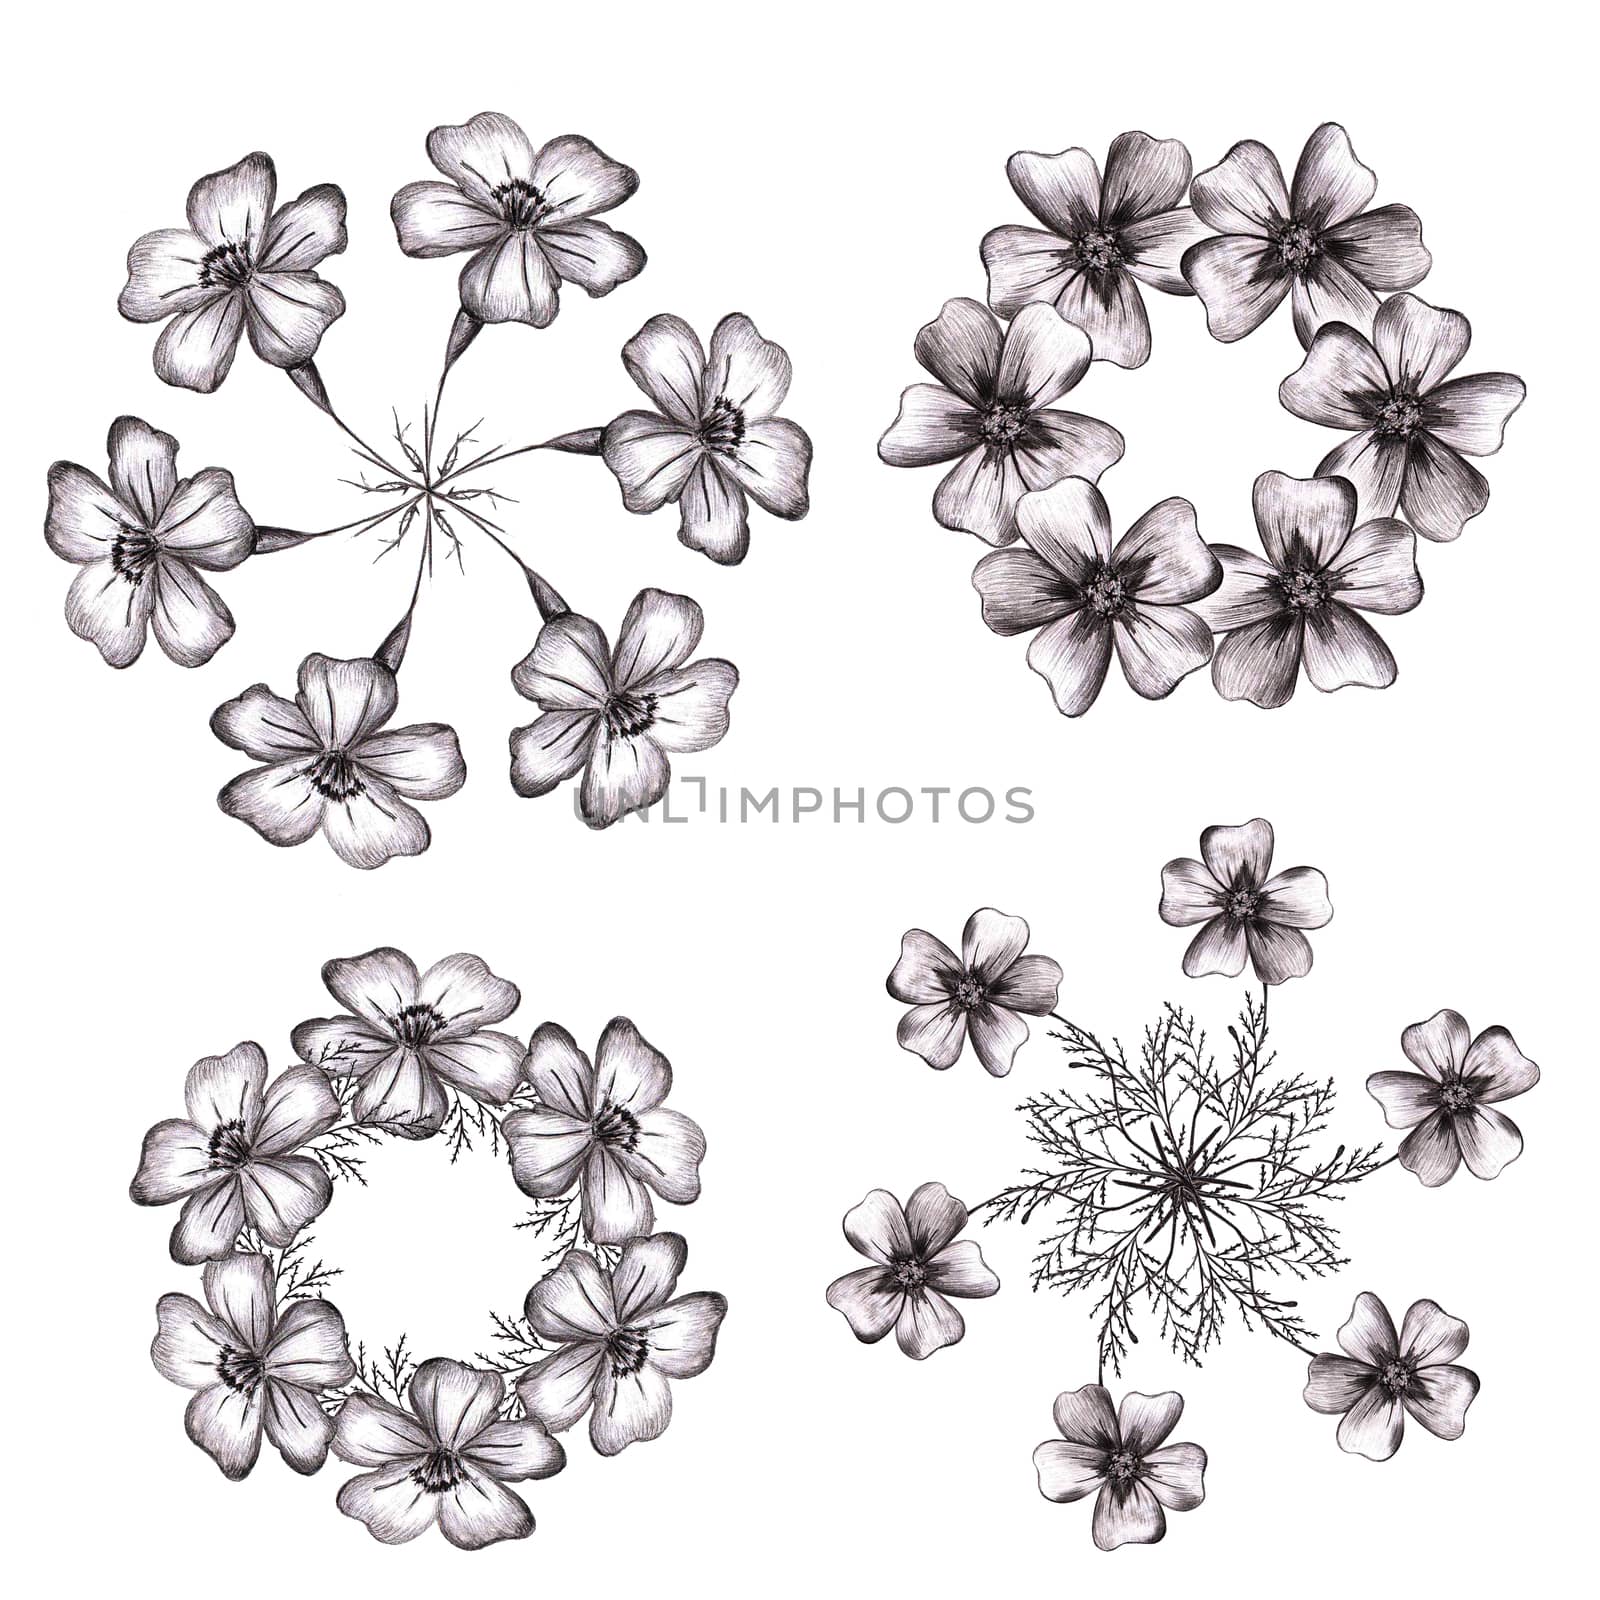 Set of Black Hand-Drawn Isolated Flower Circle Compositions. Monochrome Botanical Plant Illustration. Thin-leaved Marigolds for Print, Tattoo, Design, Holiday, Wedding and Birthday Card.